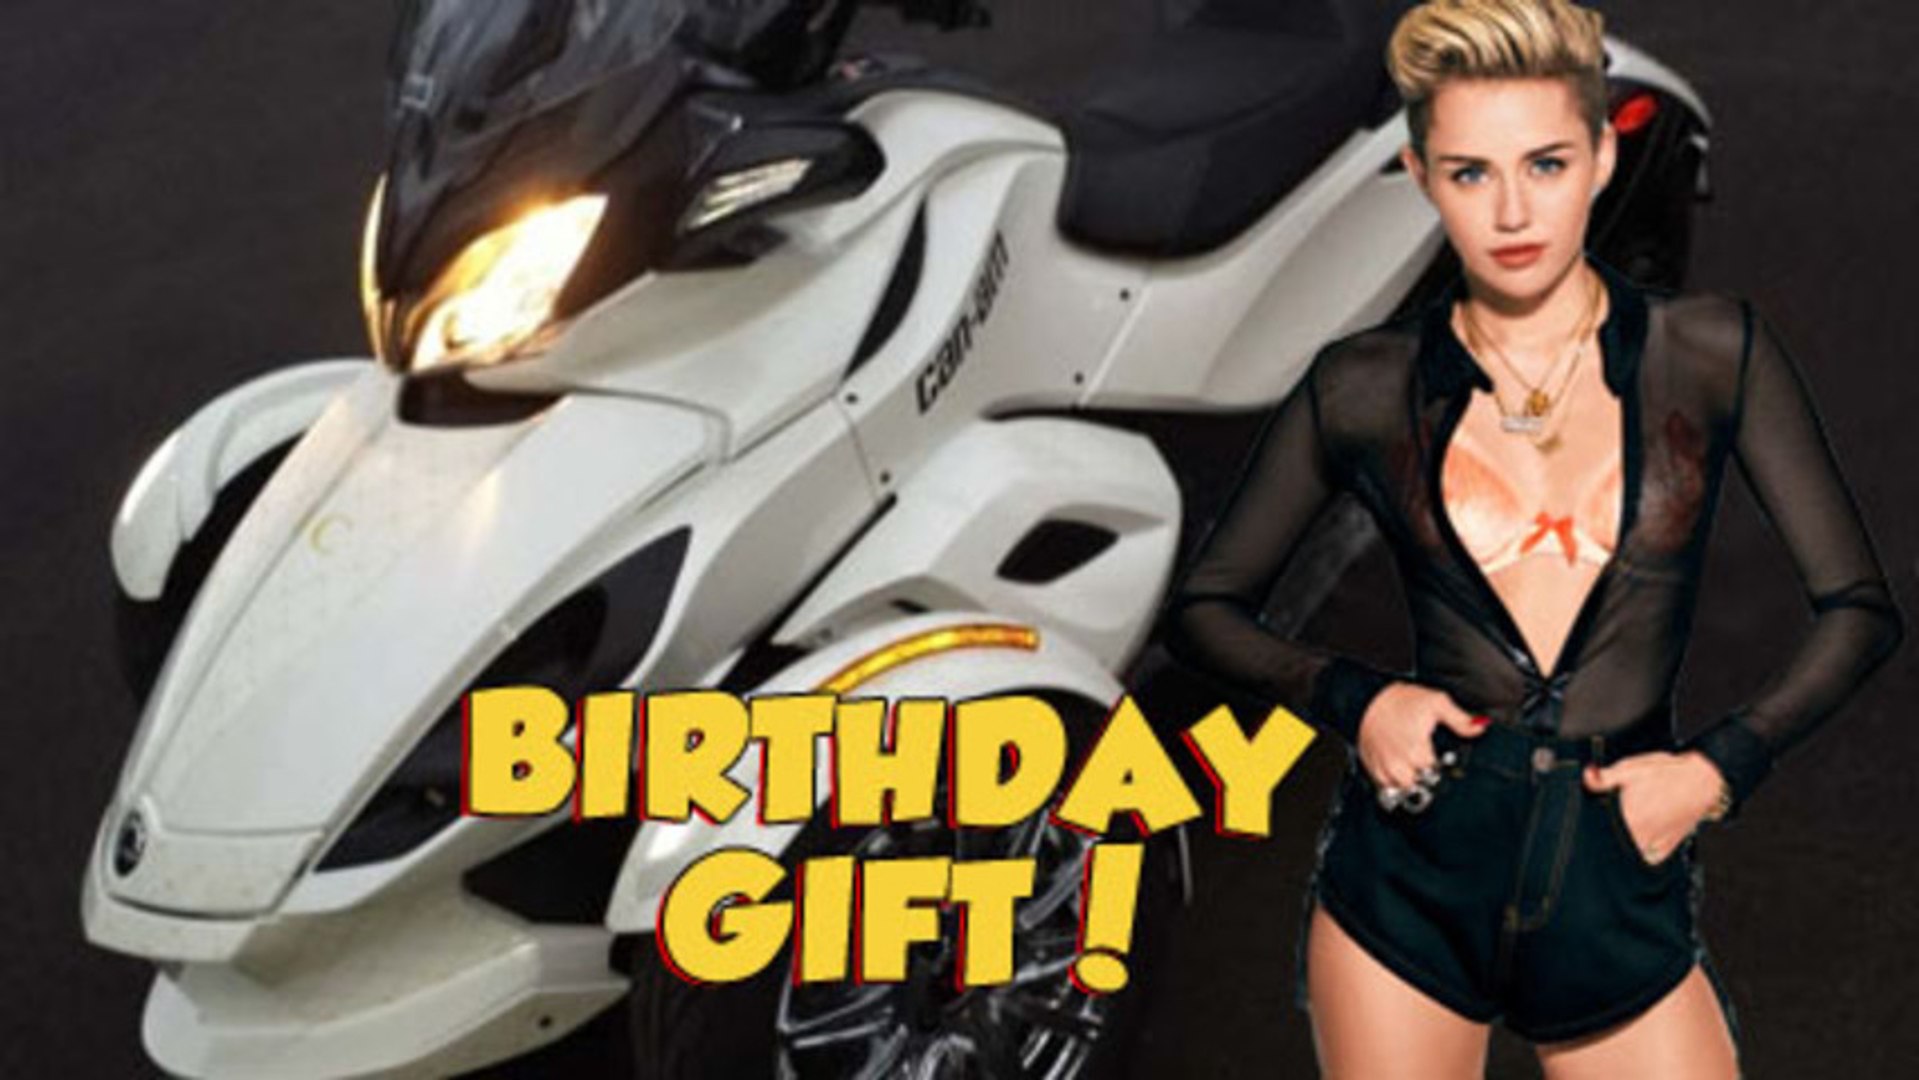 Miley Cyrus 21st Birthday Gift Worth $25,000 Limited Edition Spyder - Hot or Not ?